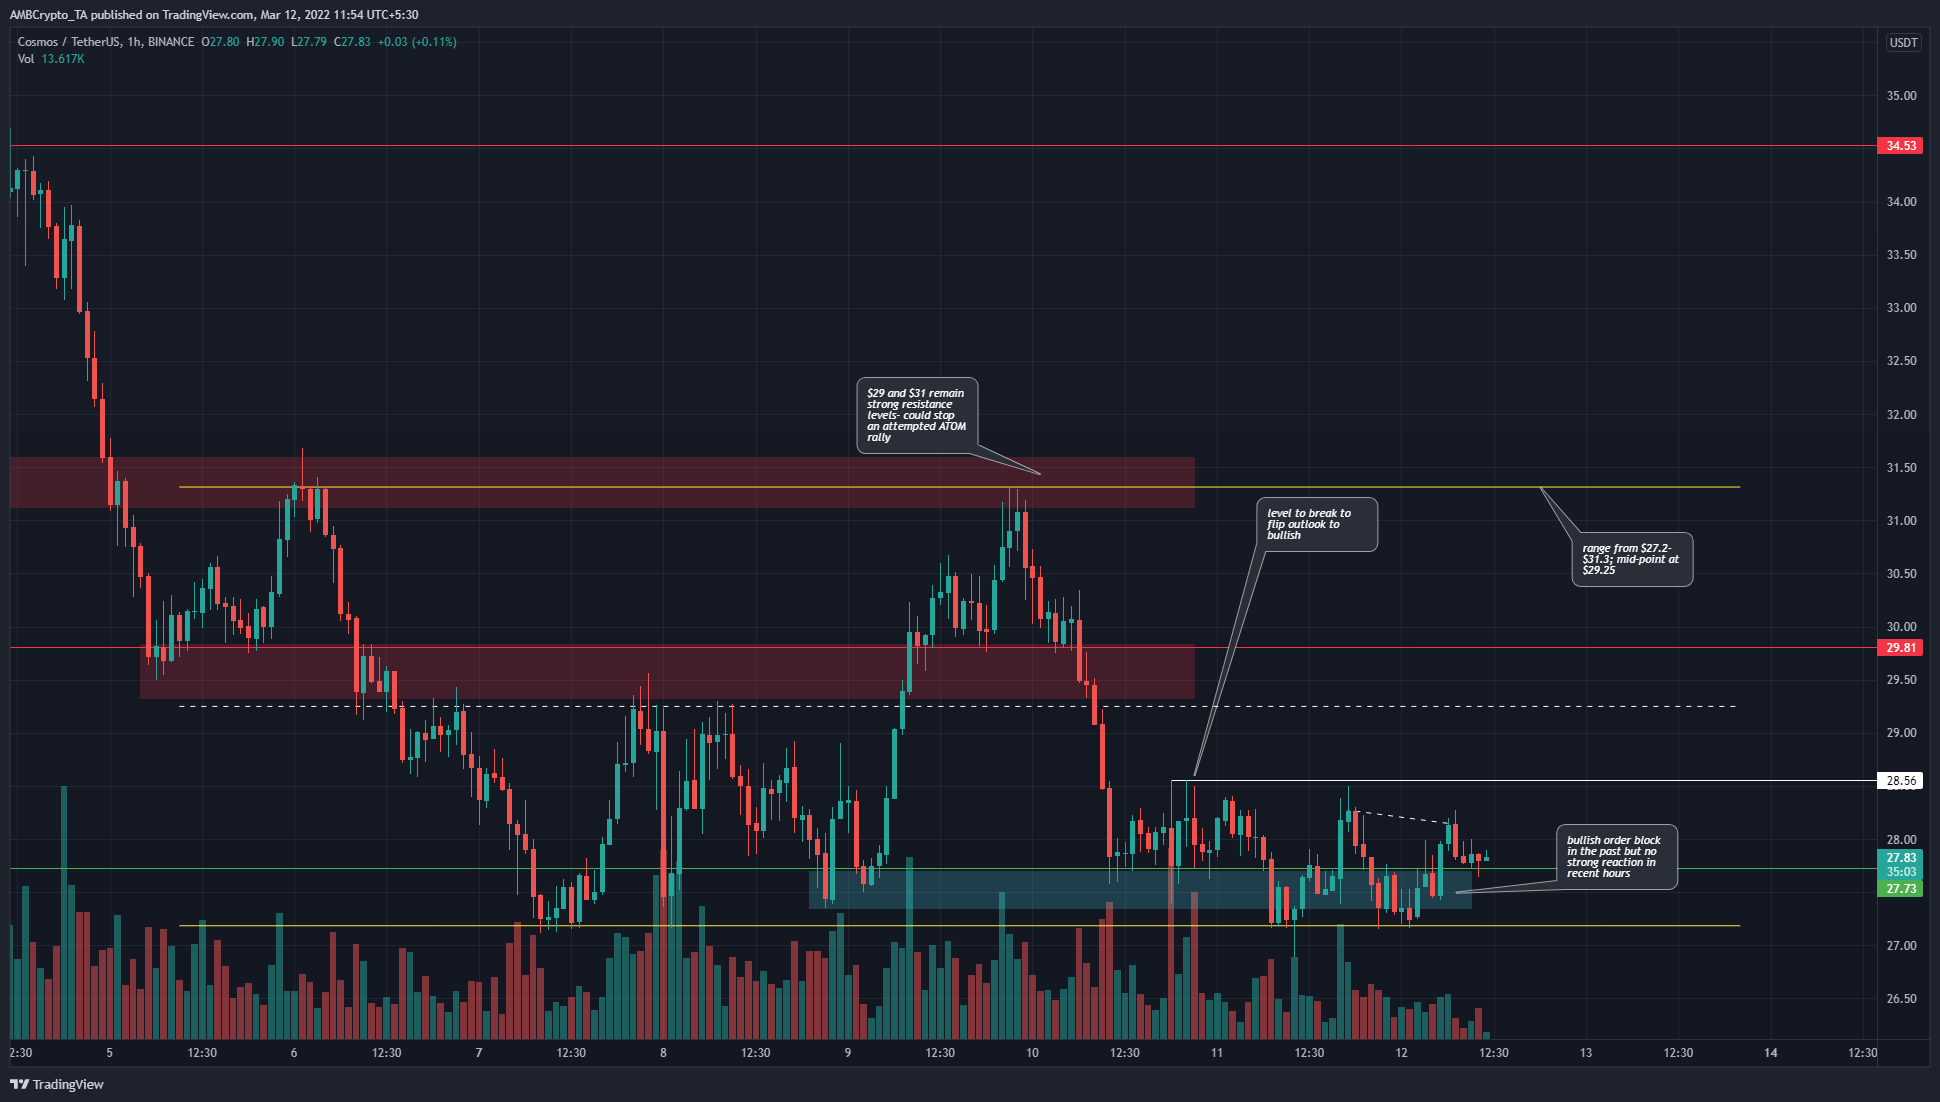 Cosmos was trading at an interesting area for buyers but needs to break this level